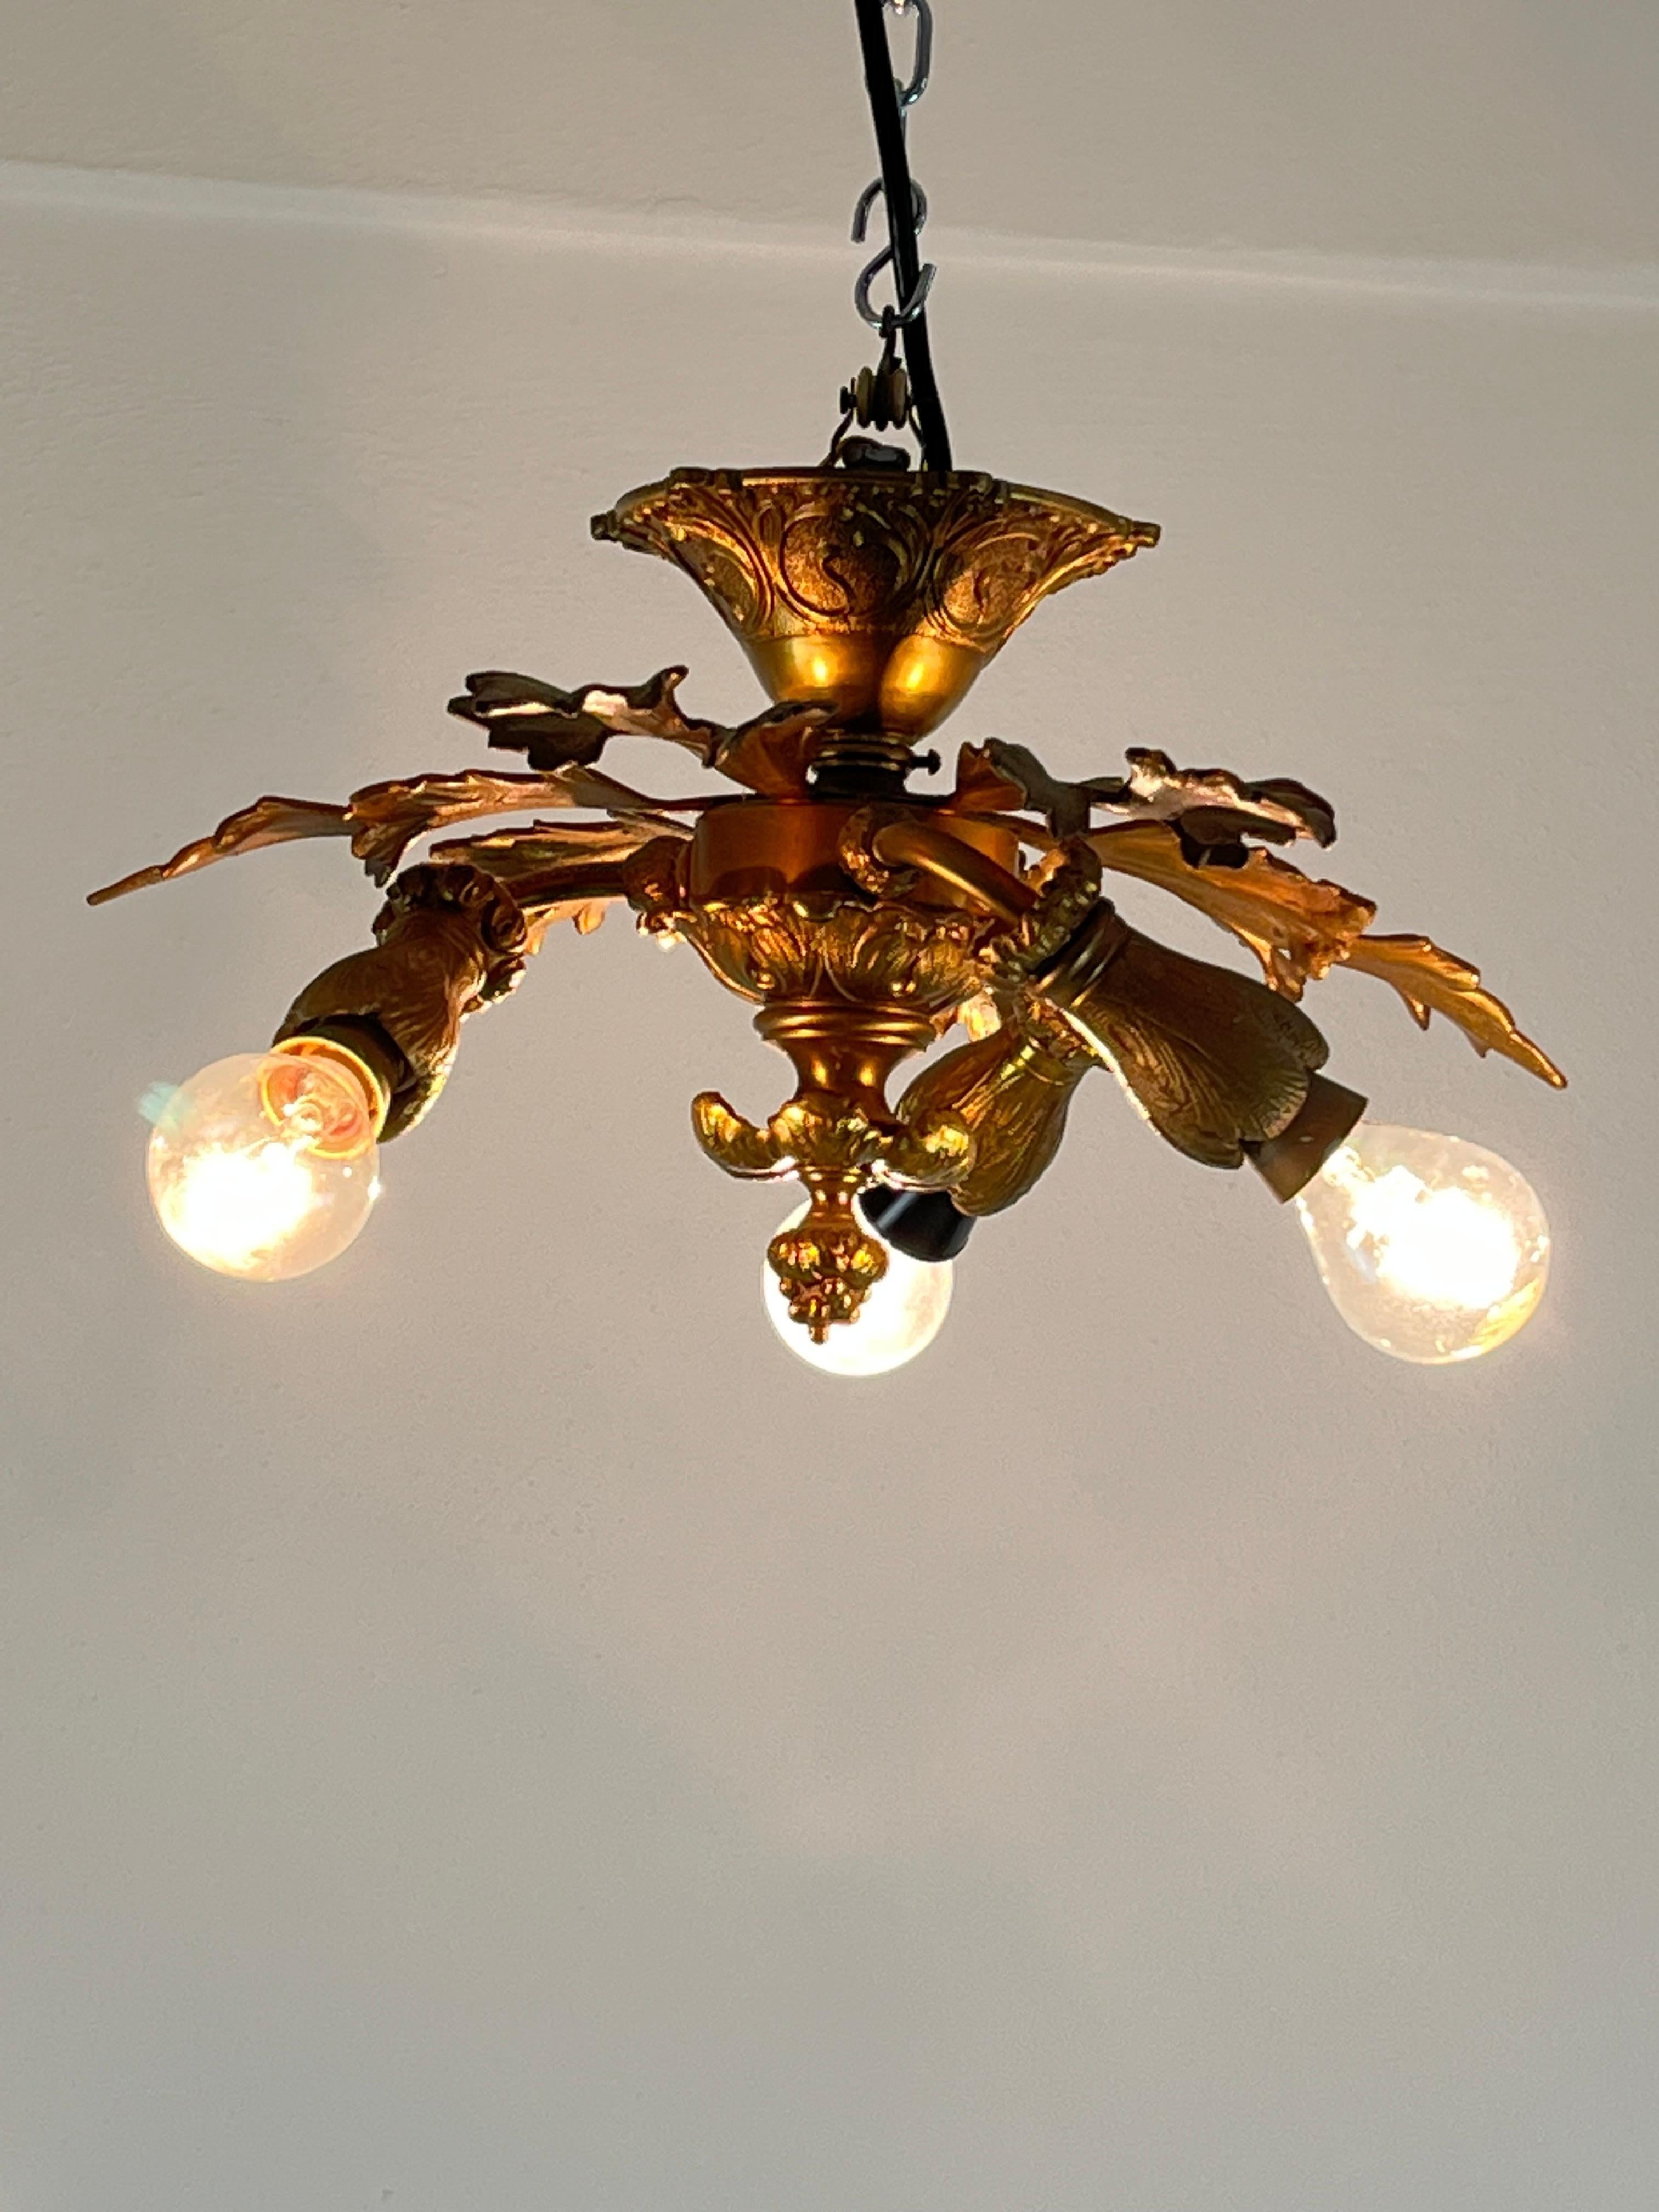 Bronze three-light chandelier, Italy, 1960s.
It has always belonged to my family, purchased by my great-grandparents. In good condition, intact and functional.